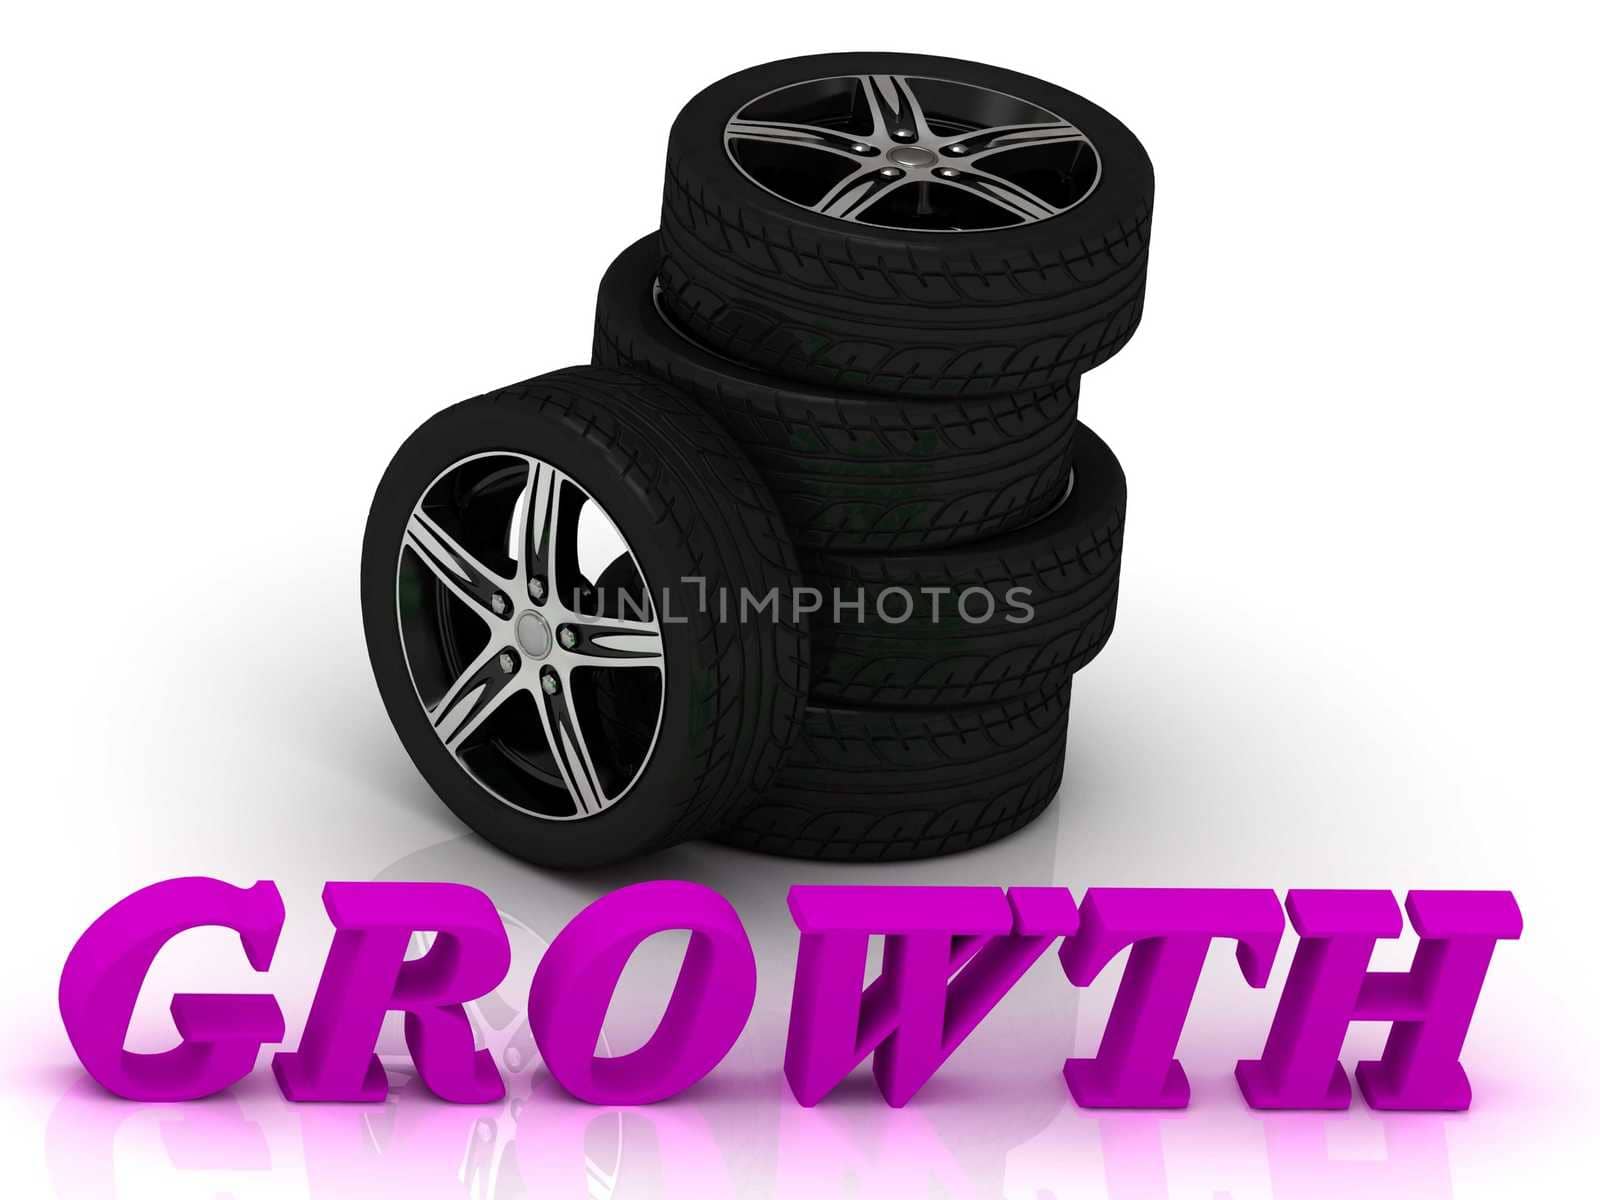 GROWTH- bright letters and rims mashine black wheels on a white background